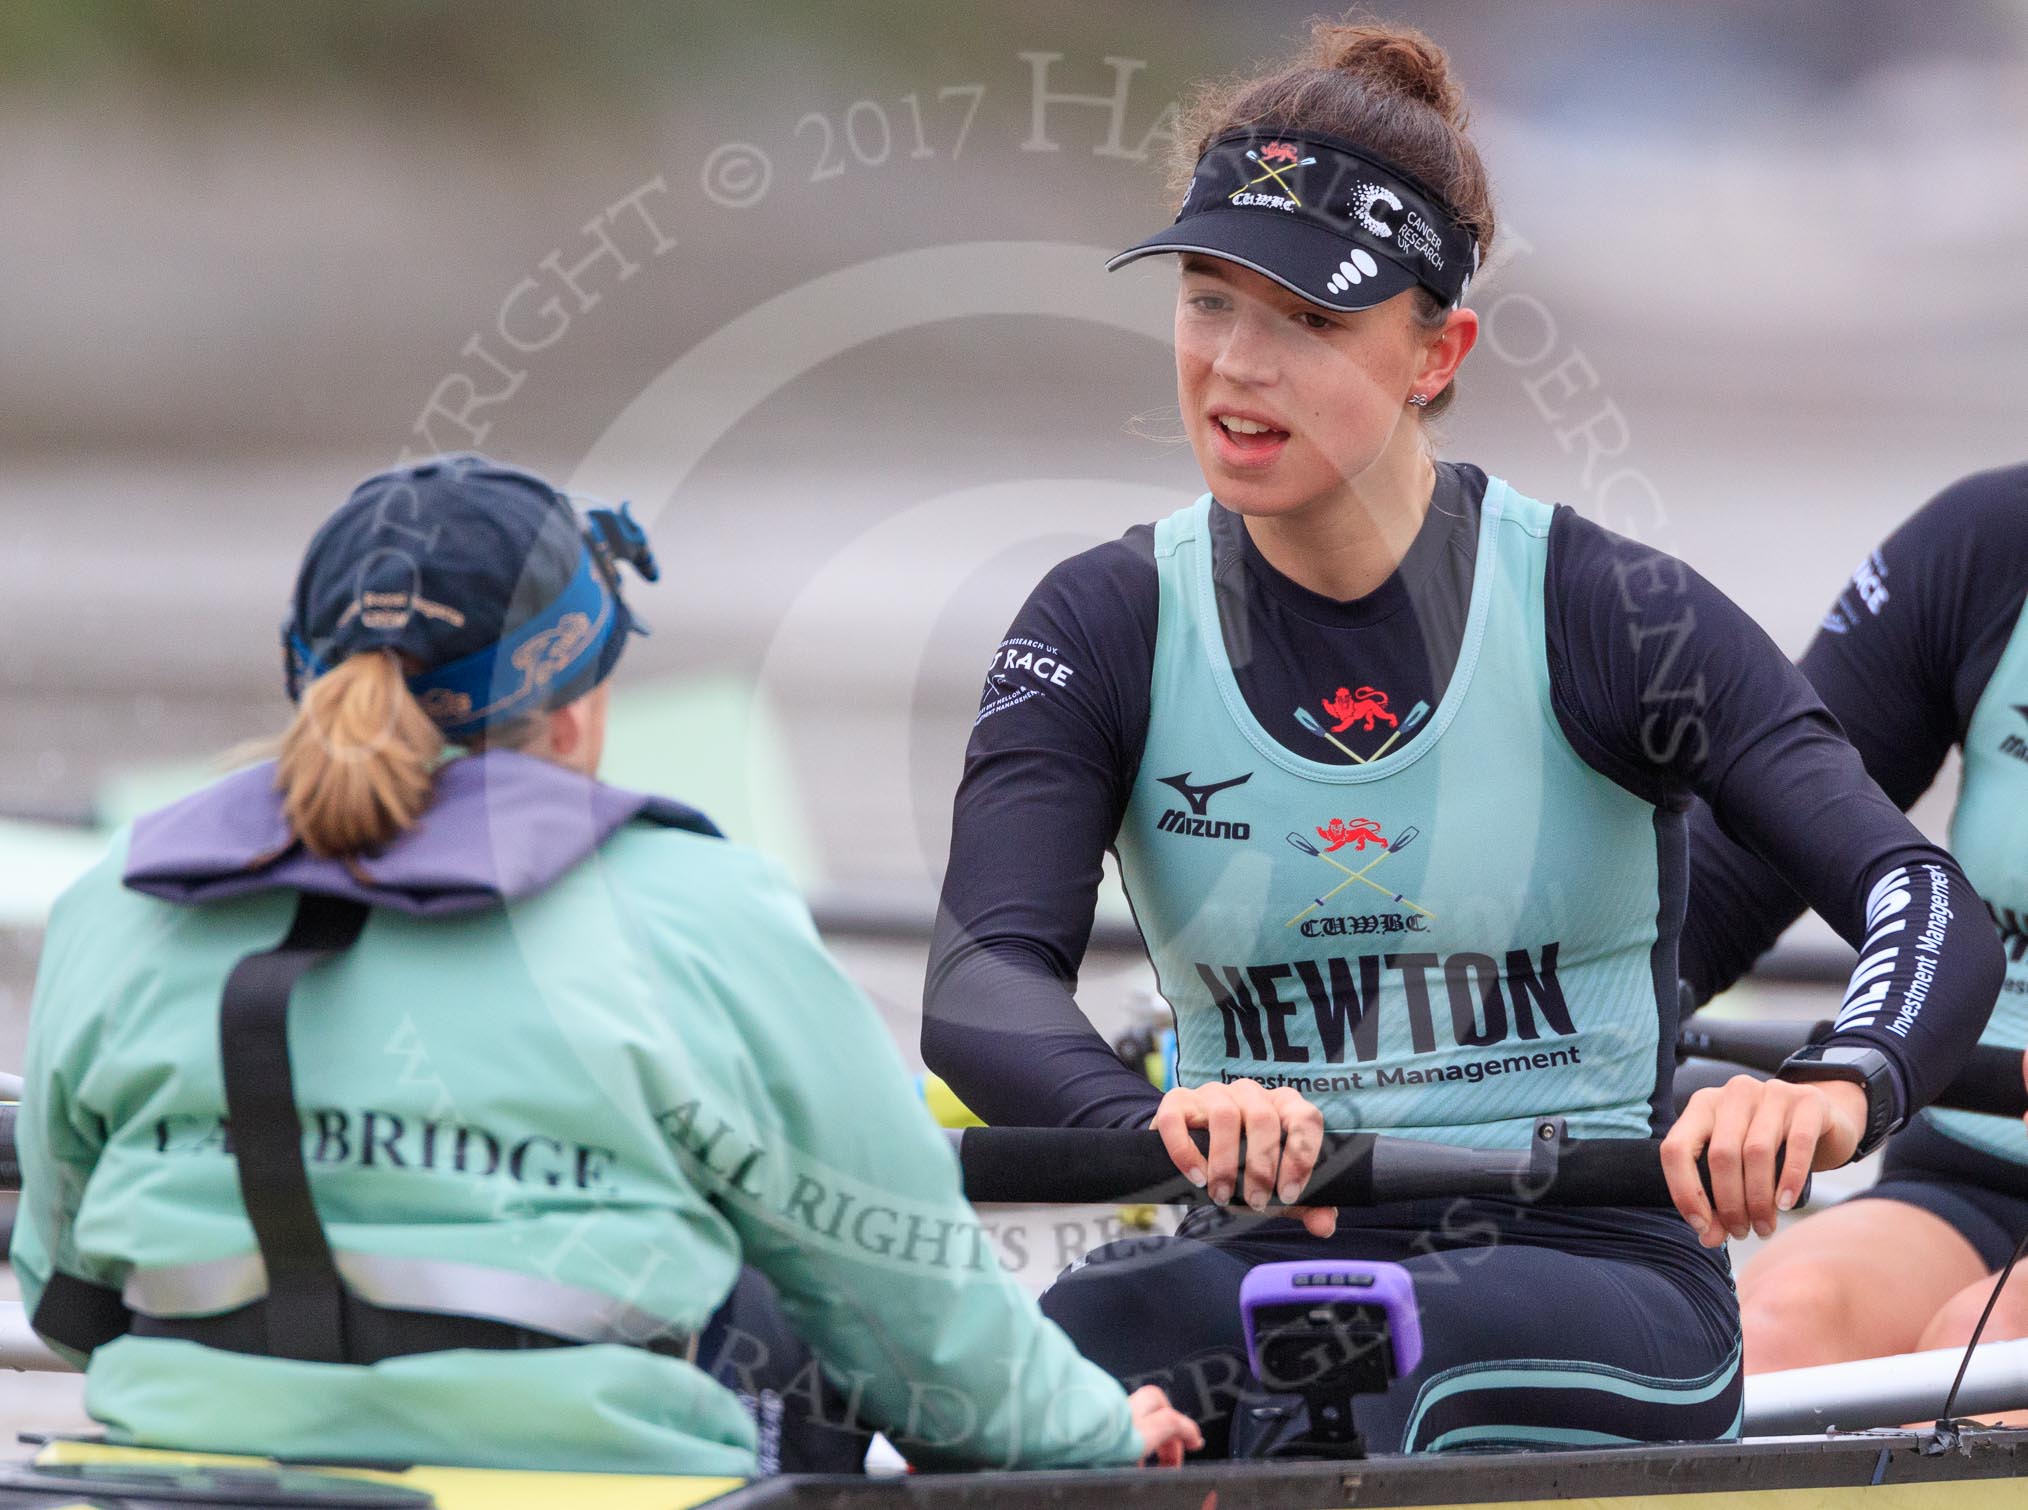 The Boat Race season 2018 - Women's Boat Race Trial Eights (CUWBC, Cambridge): Wingardium Leviosa. Rowing photographs can be misleading, it may look like a chat between cox Sophie Wrixon and stroke Imogen Grant, but it is part of a fierce battle with Expecto Patronum.
River Thames between Putney Bridge and Mortlake,
London SW15,

United Kingdom,
on 05 December 2017 at 12:49, image #102